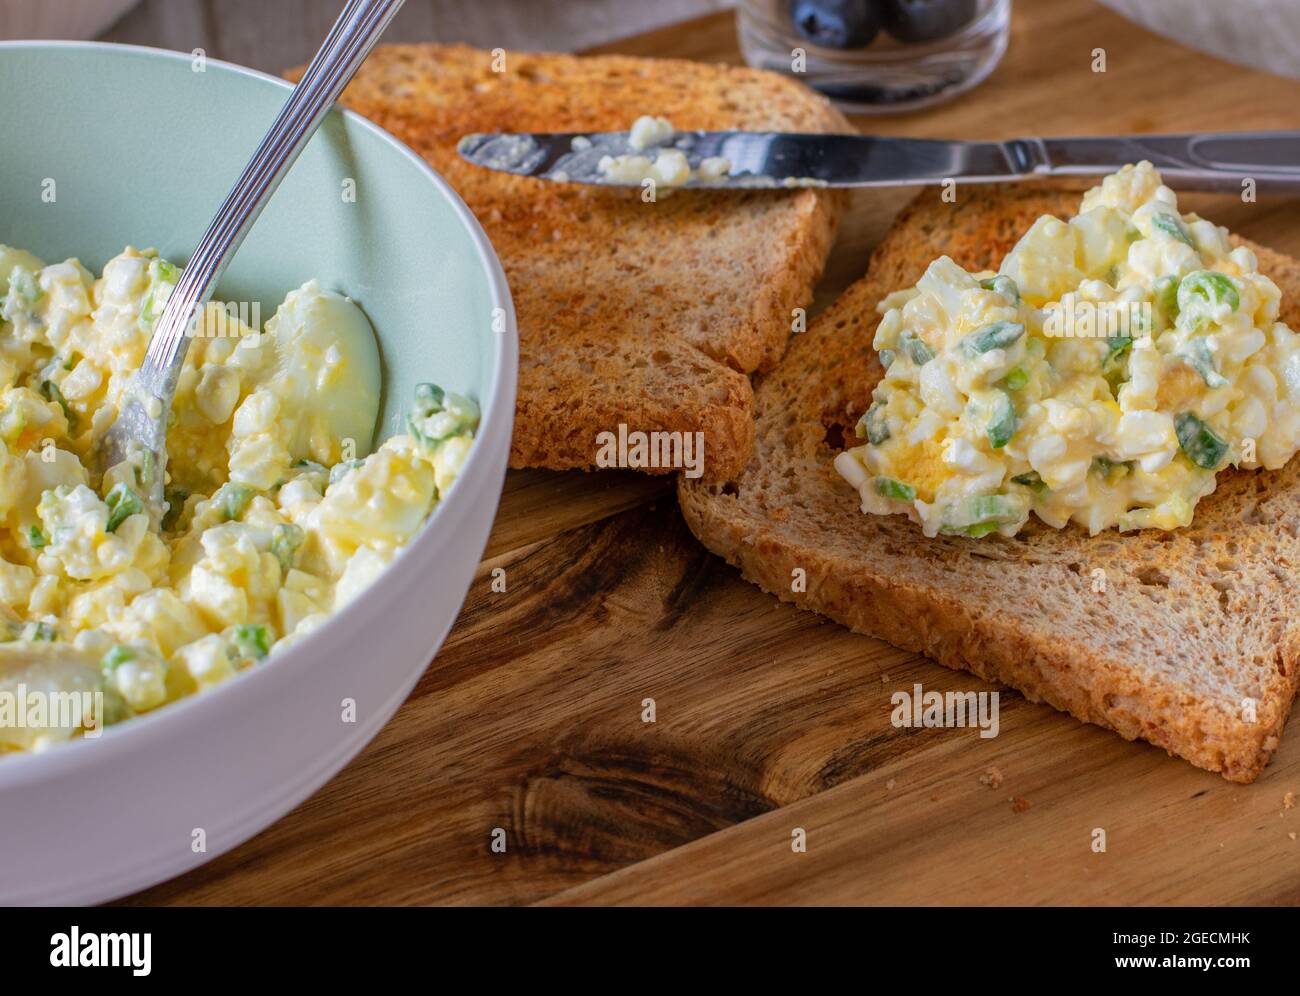 Low fat egg salad made with cottage cheese, boiled and chopped eggs and chives served with whole grain toast on a wooden board. High protein meal Stock Photo